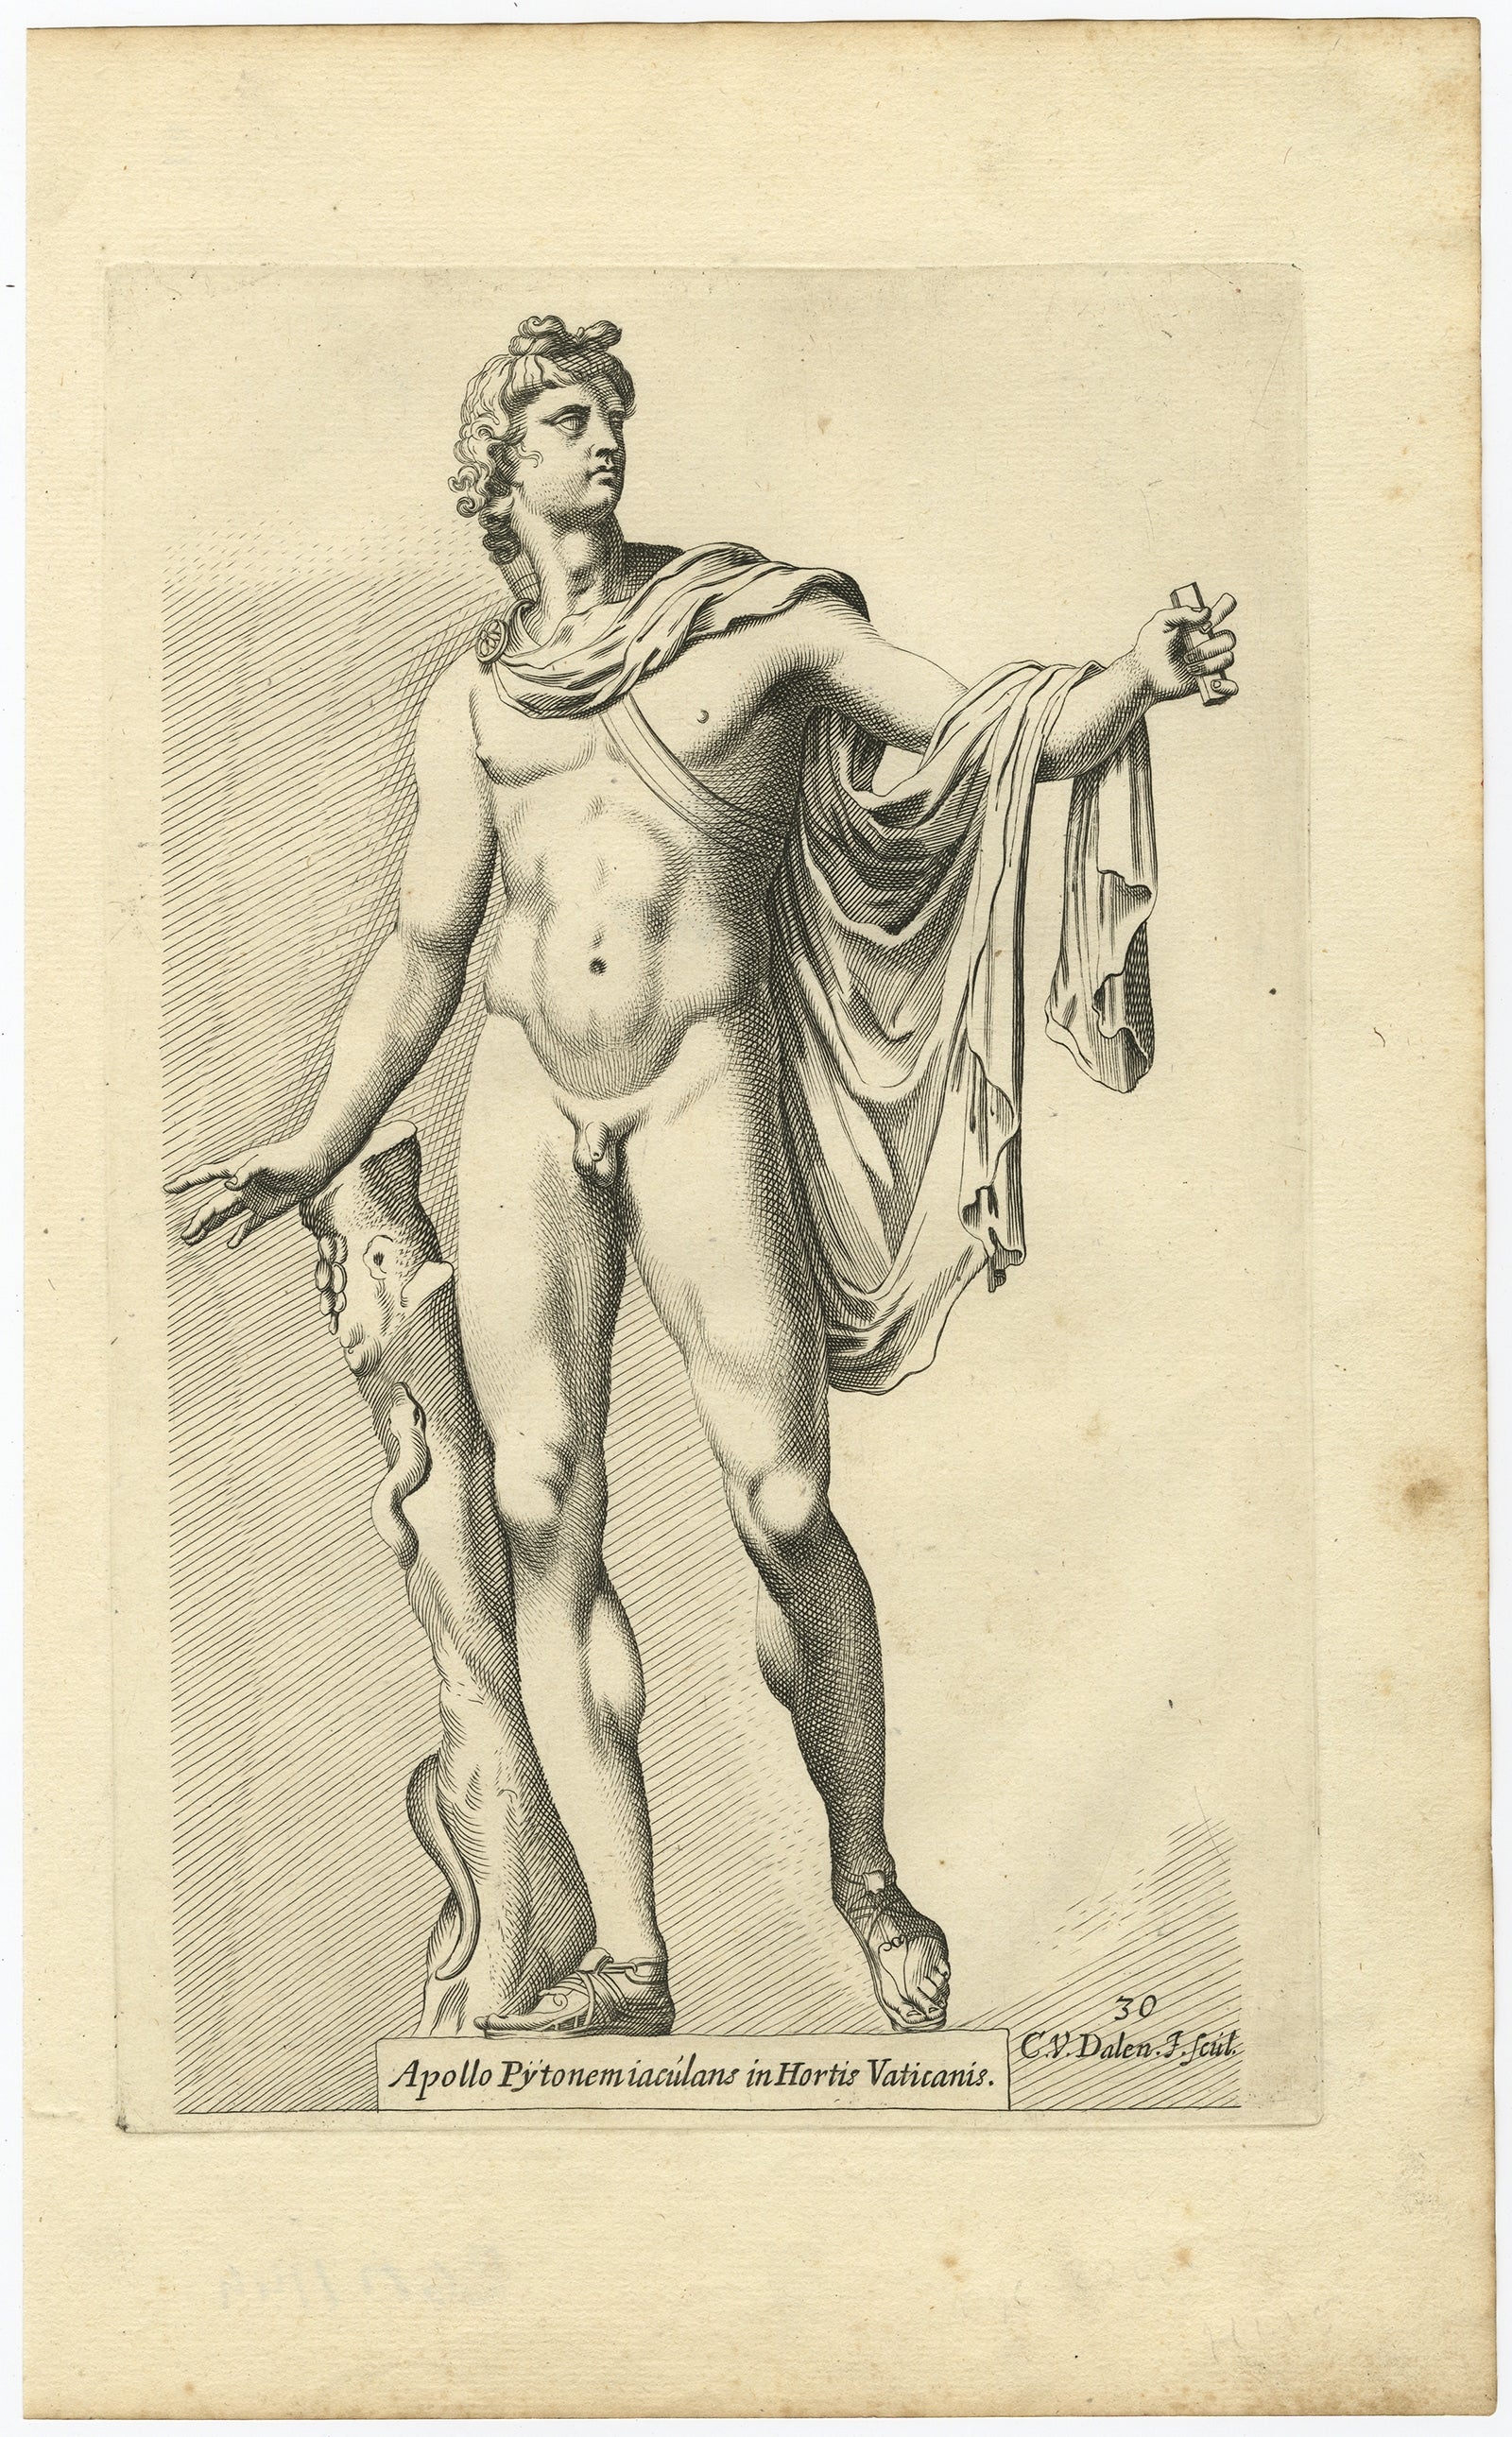 Antique print, titled: 'Apollo Pytonem iaculans in Hortis Vaticanis.' 

Statue of Apollo with Python. Apollo is one of the Olympian deities in classical Greek and Roman religion and mythology.

From the 1660 Dutch edition of 'Icones et Segmenta